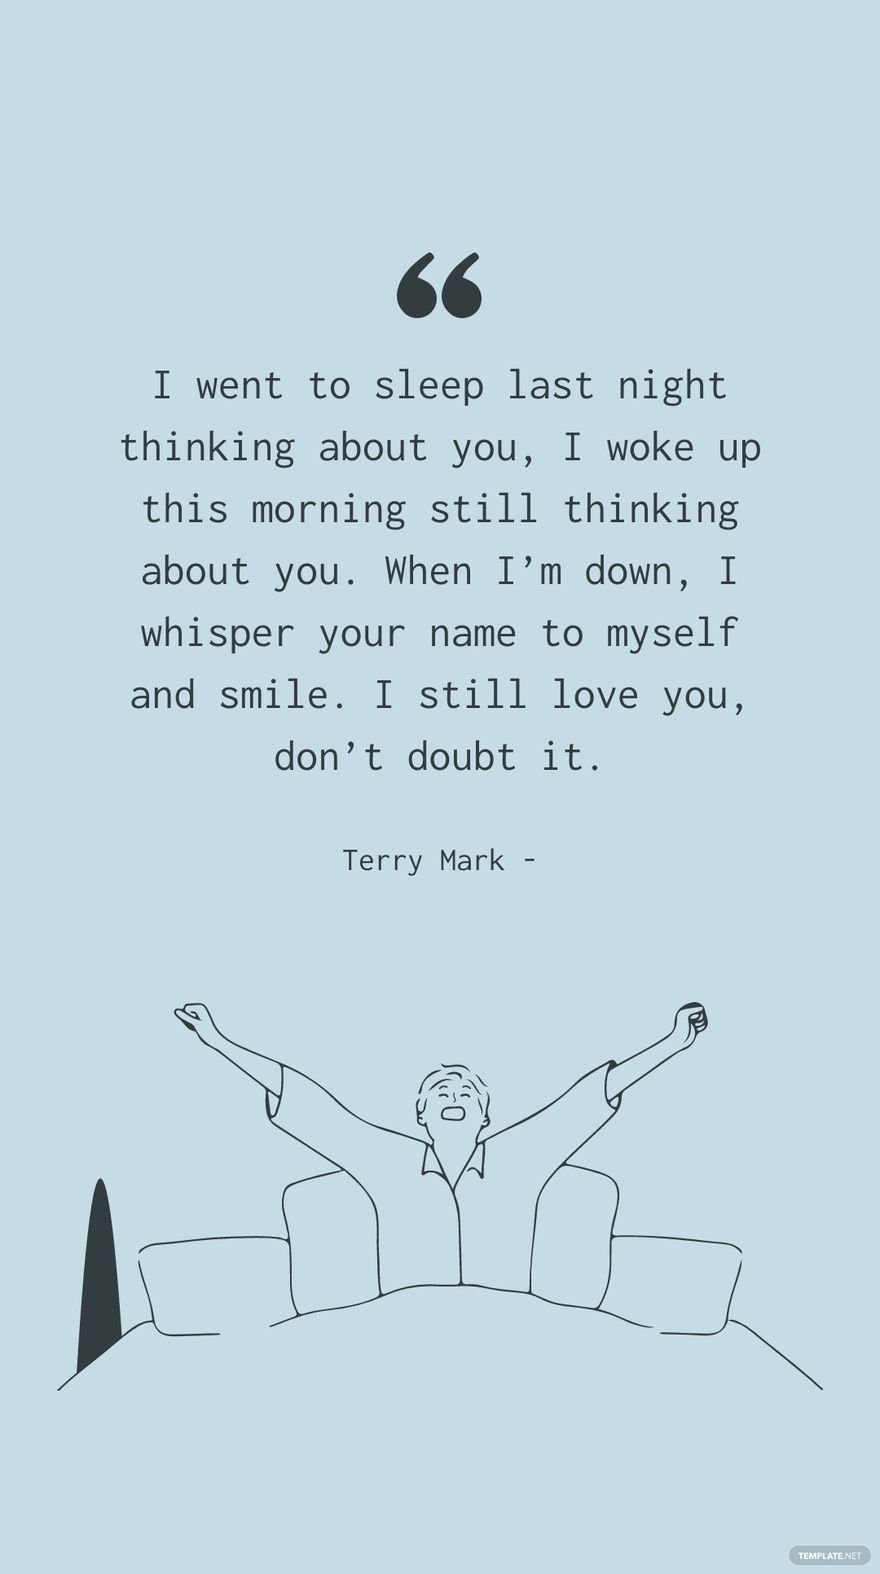 Terry Mark - I went to sleep last night thinking about you, I woke up this morning still thinking about you. When I’m down, I whisper your name to myself and smile. I still love you, don’t doubt it.